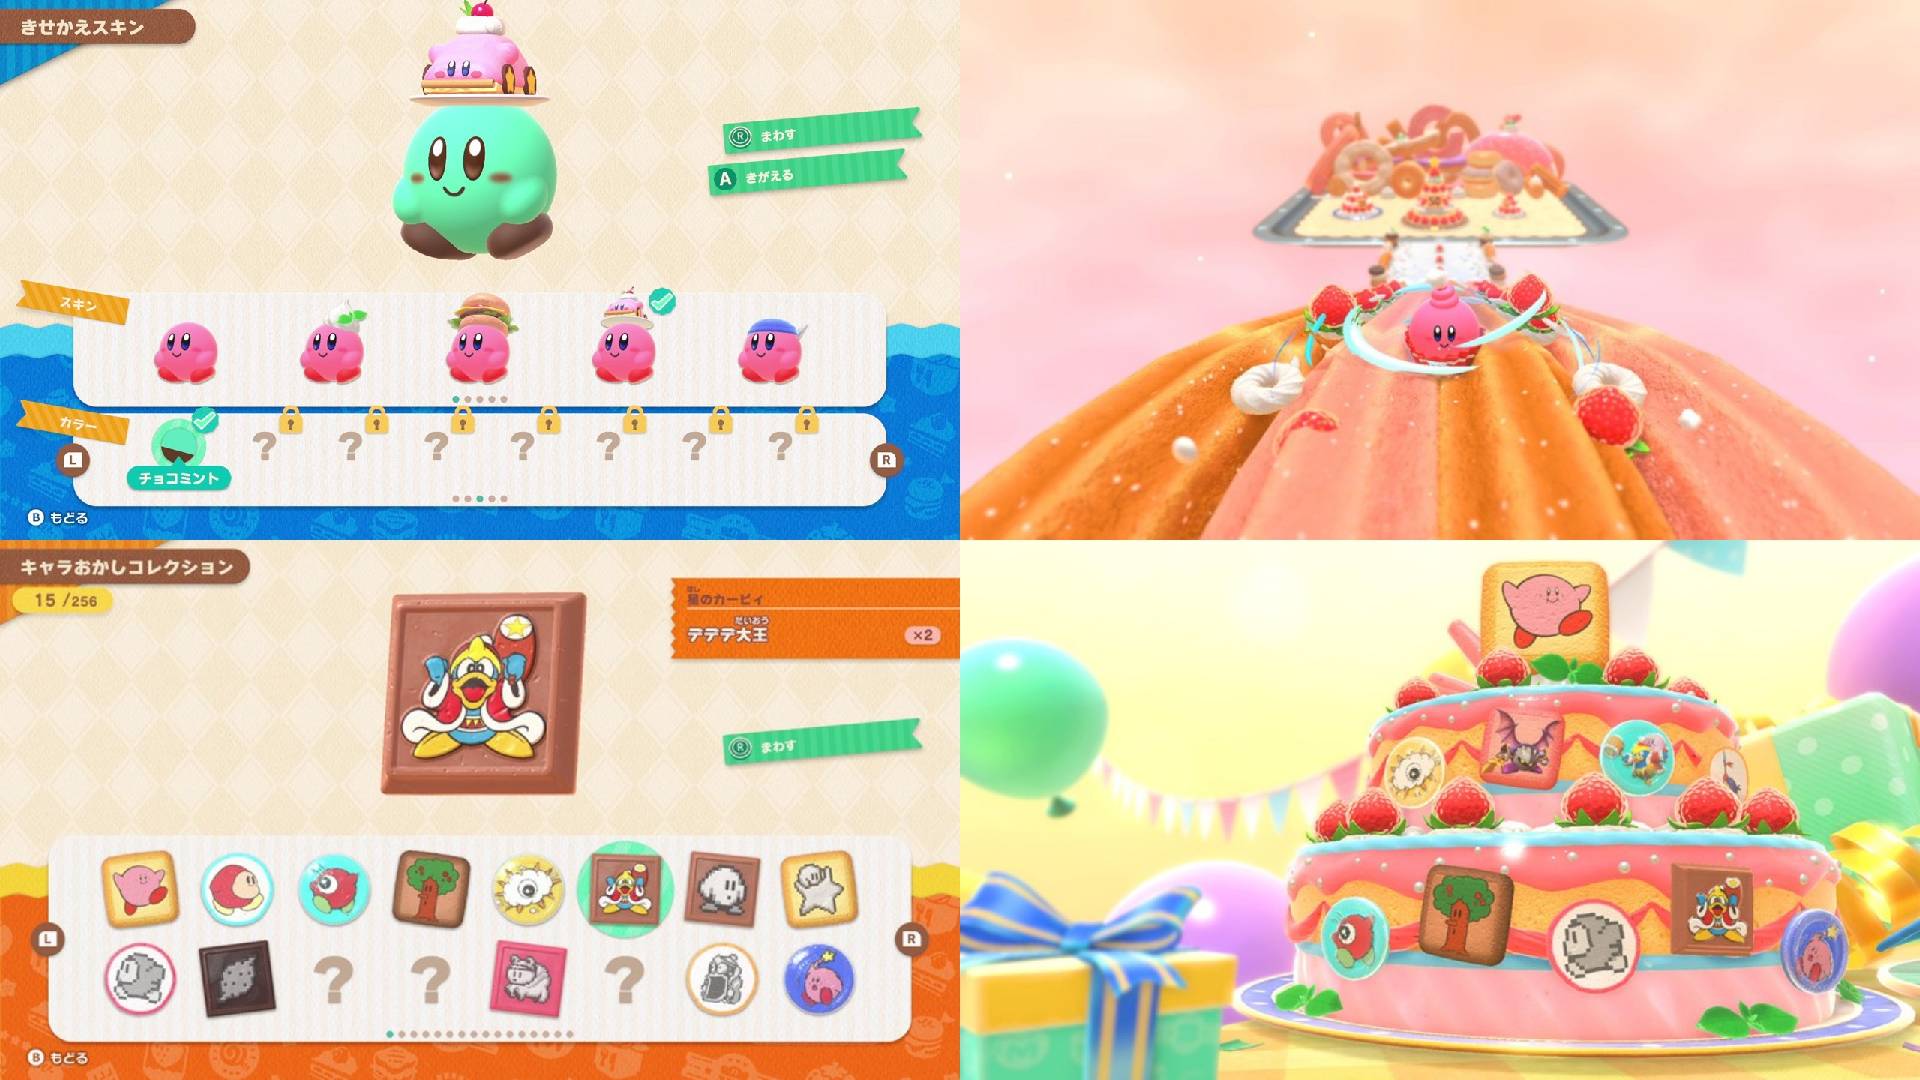 Kirby's Dream Buffet release date: four screenshots from Kirby's Dream Buffet show Kirby and other playable characters, as well as unlockable outfits and a hint of the sticker system in the game 